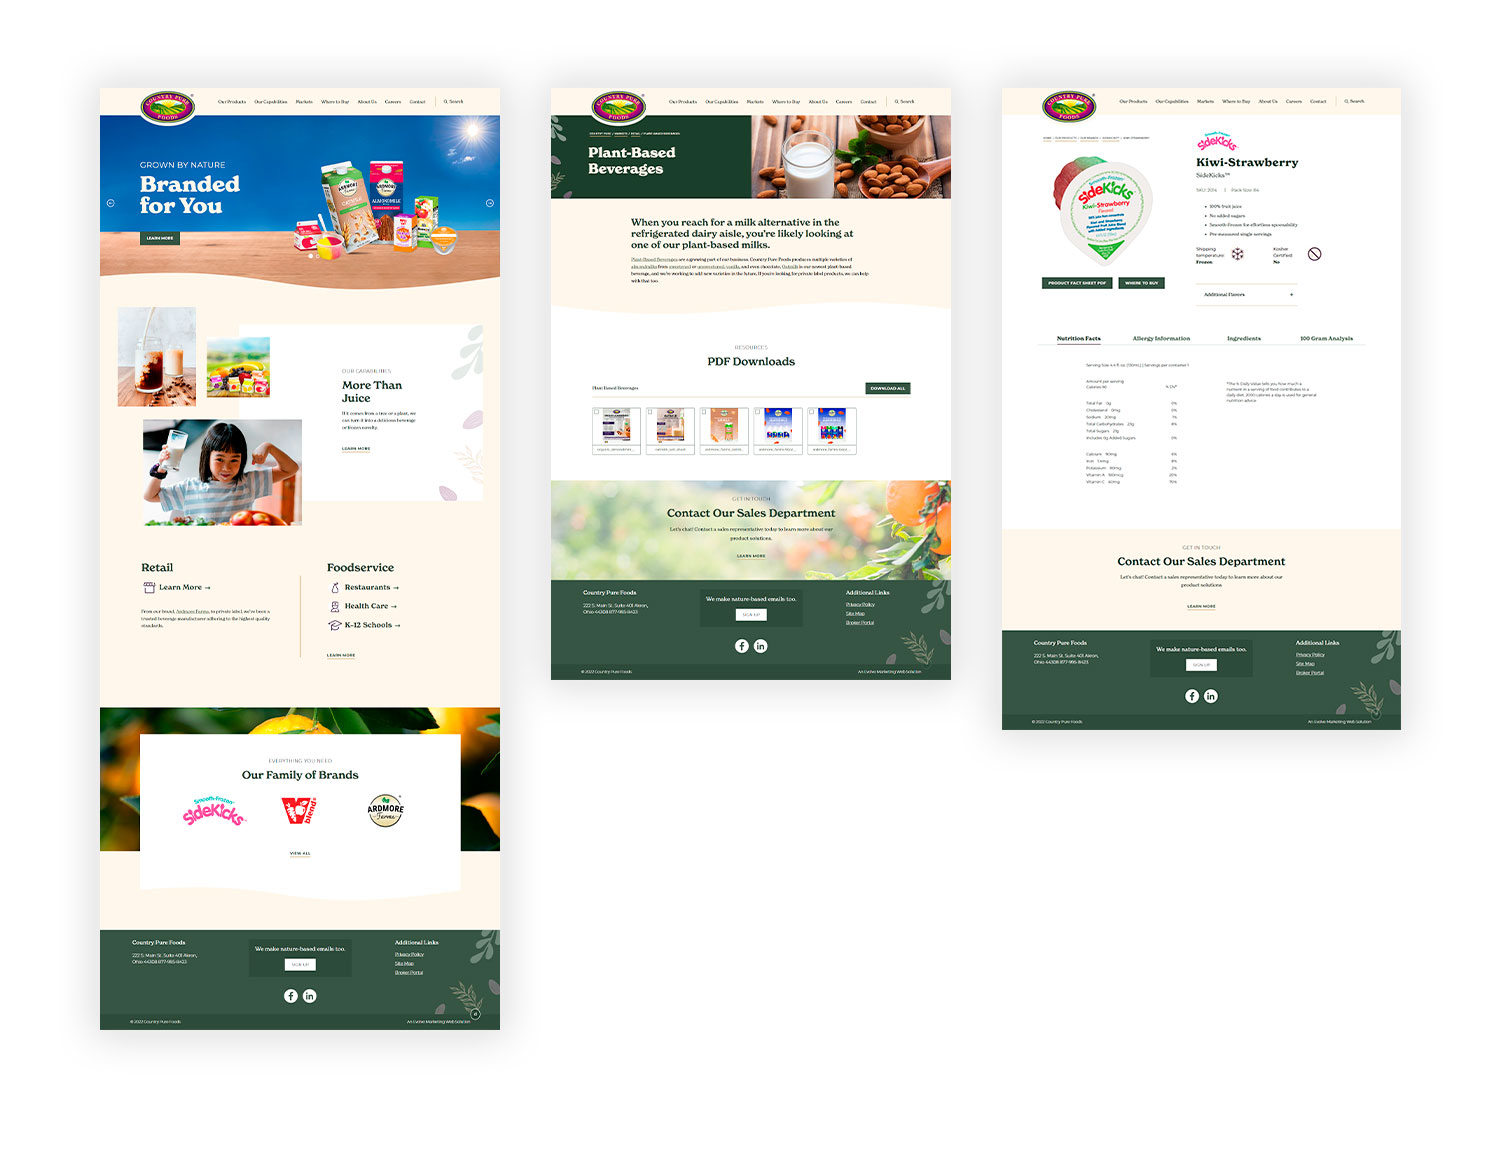 Three image versions of Country Pure website